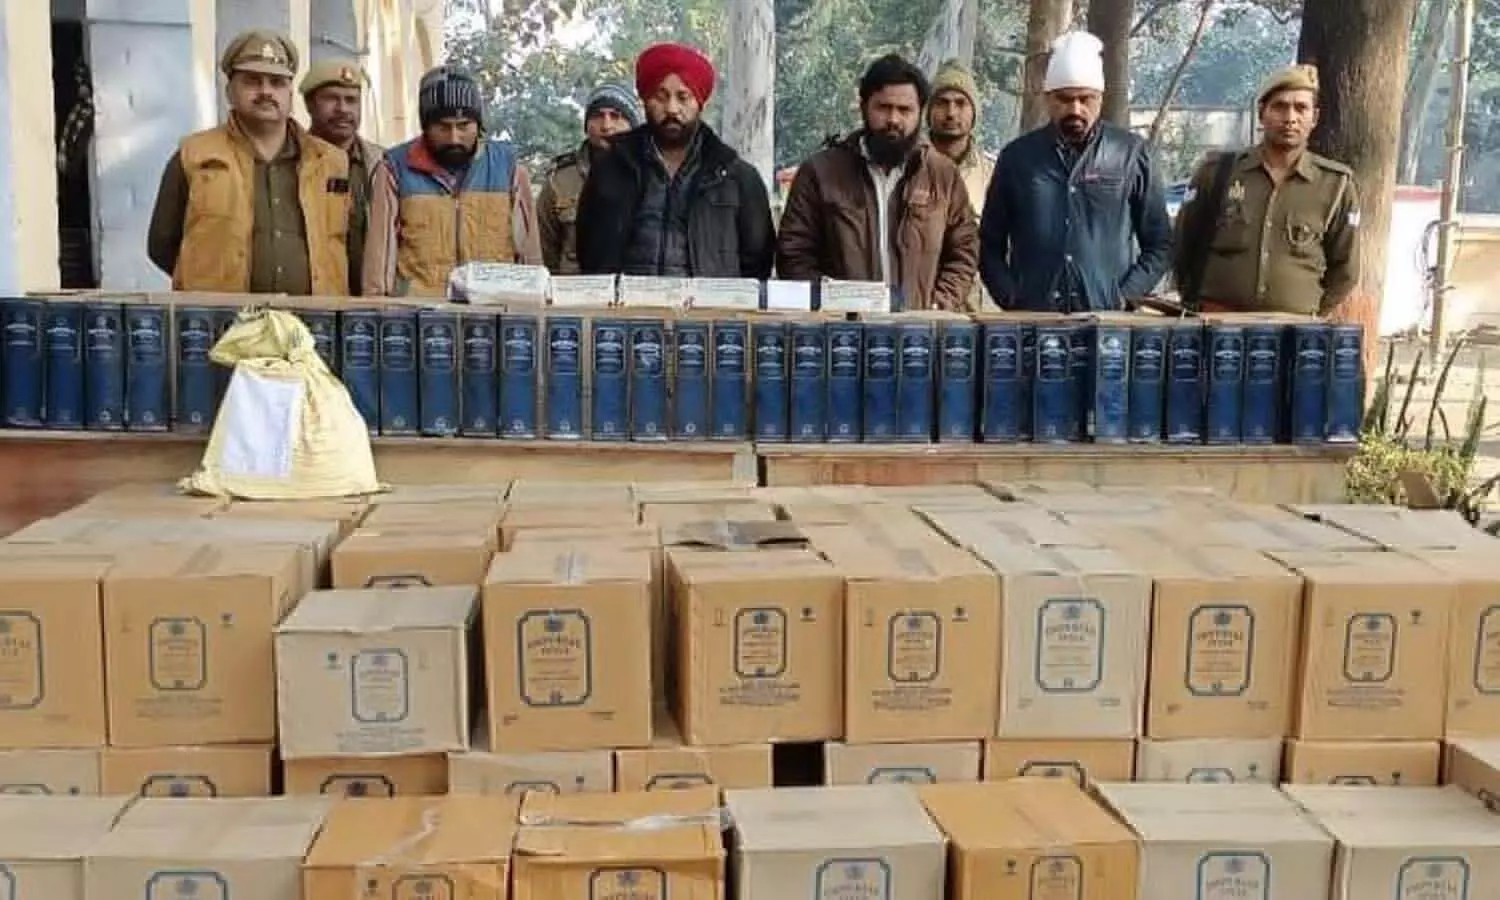 Four smugglers including English liquor worth 50 lakh arrested in Shahjahanpur, used to smuggle from Chandigarh to UP